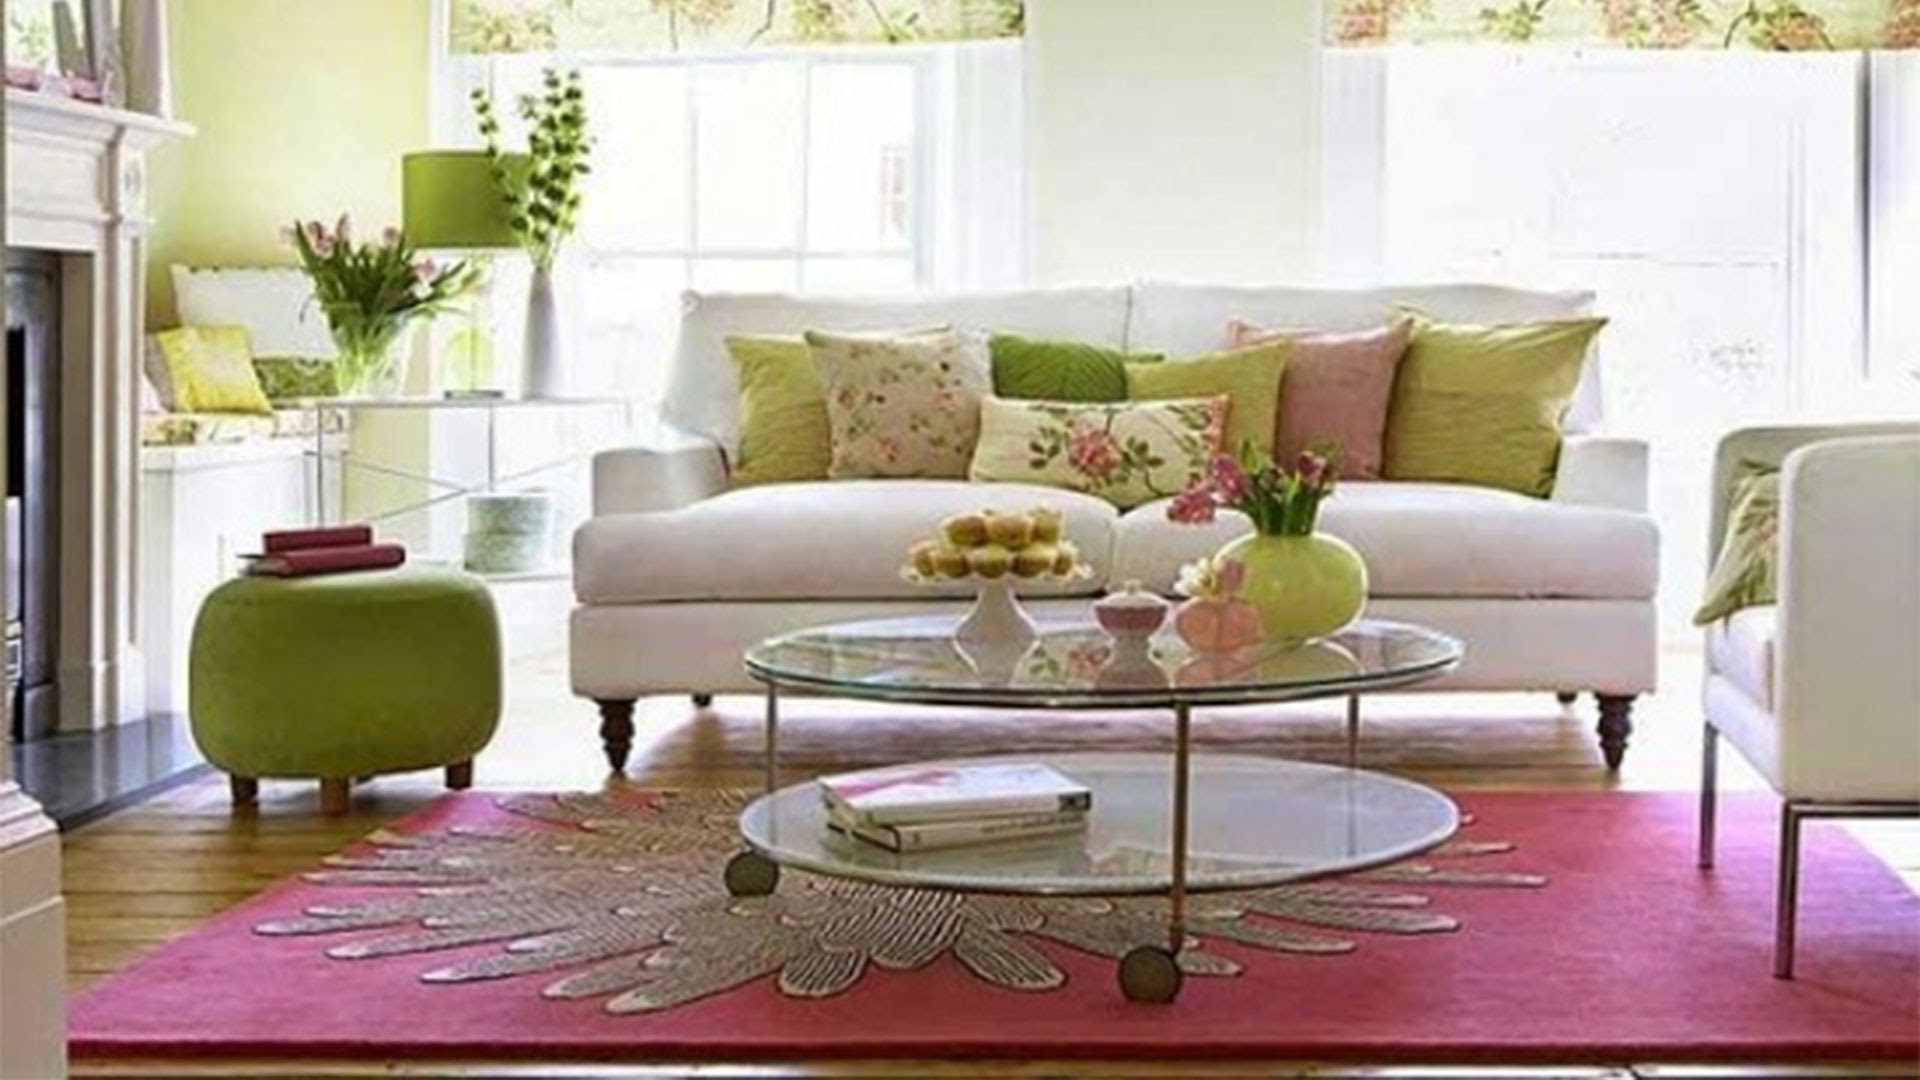 36 Living Room Decorating Ideas That Smells Like Spring - Decoholic